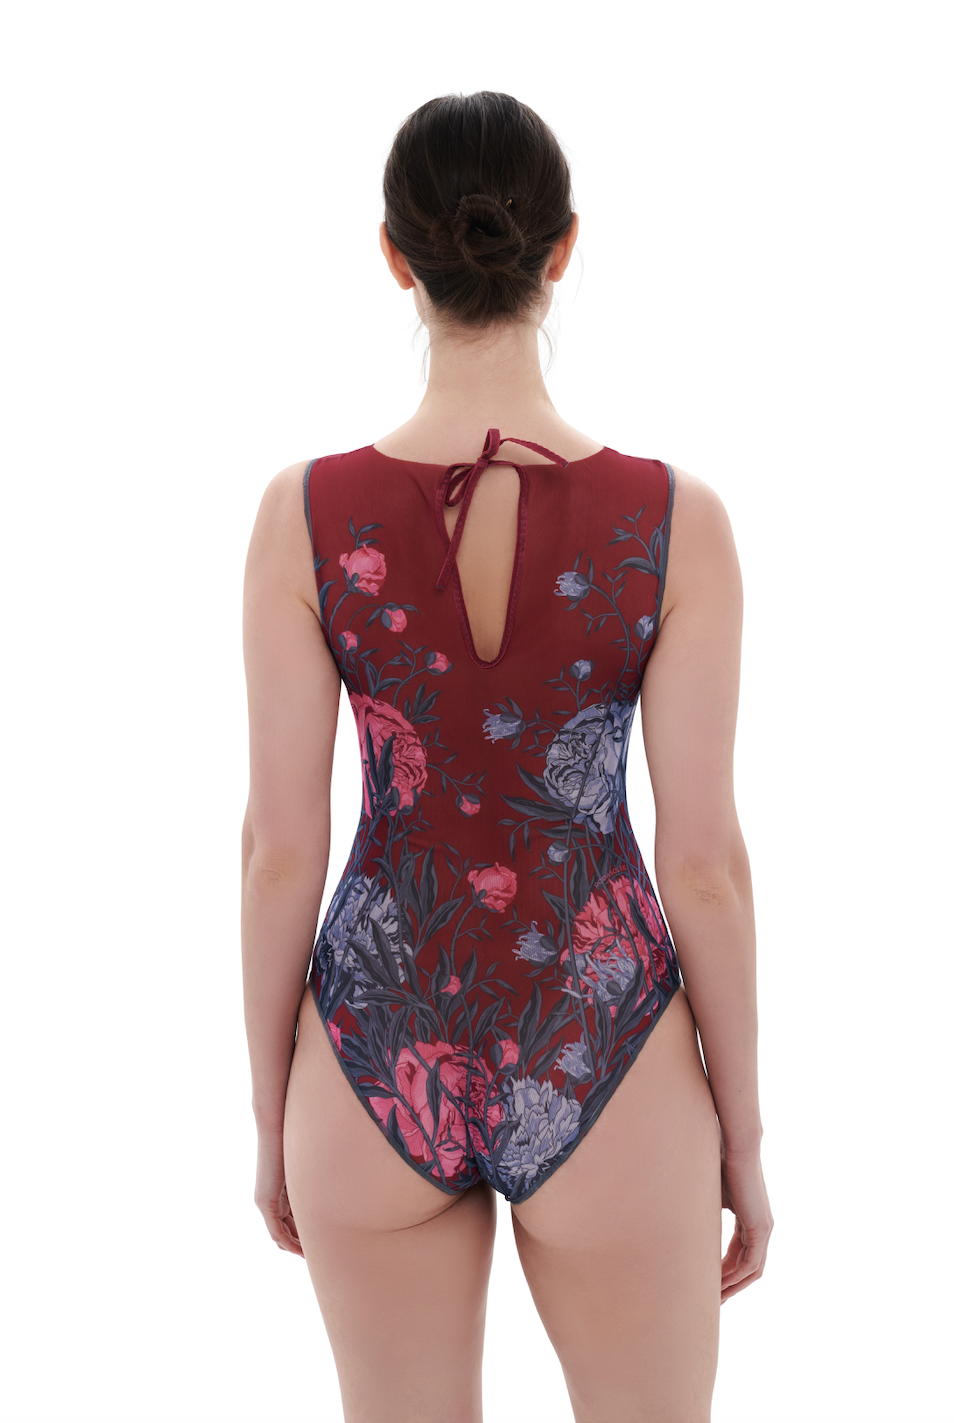 Discover sustainable tan-through smart swimsuits featuring a chic peonies print in this file. Included is a sleeveless one-piece, providing luxurious sun protection and a perfect silhouette for your beach adventures.